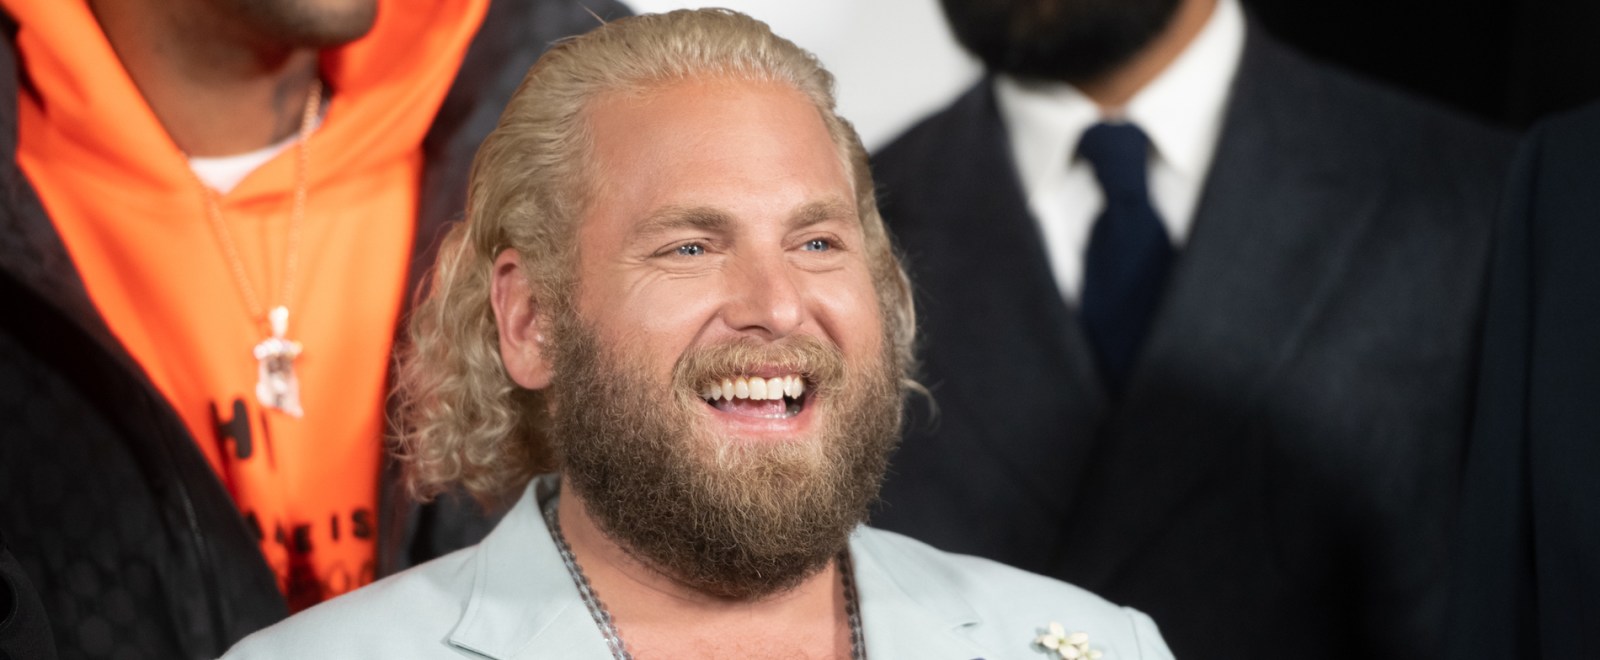 Jonah Hill Don't Look Up Premiere 2021